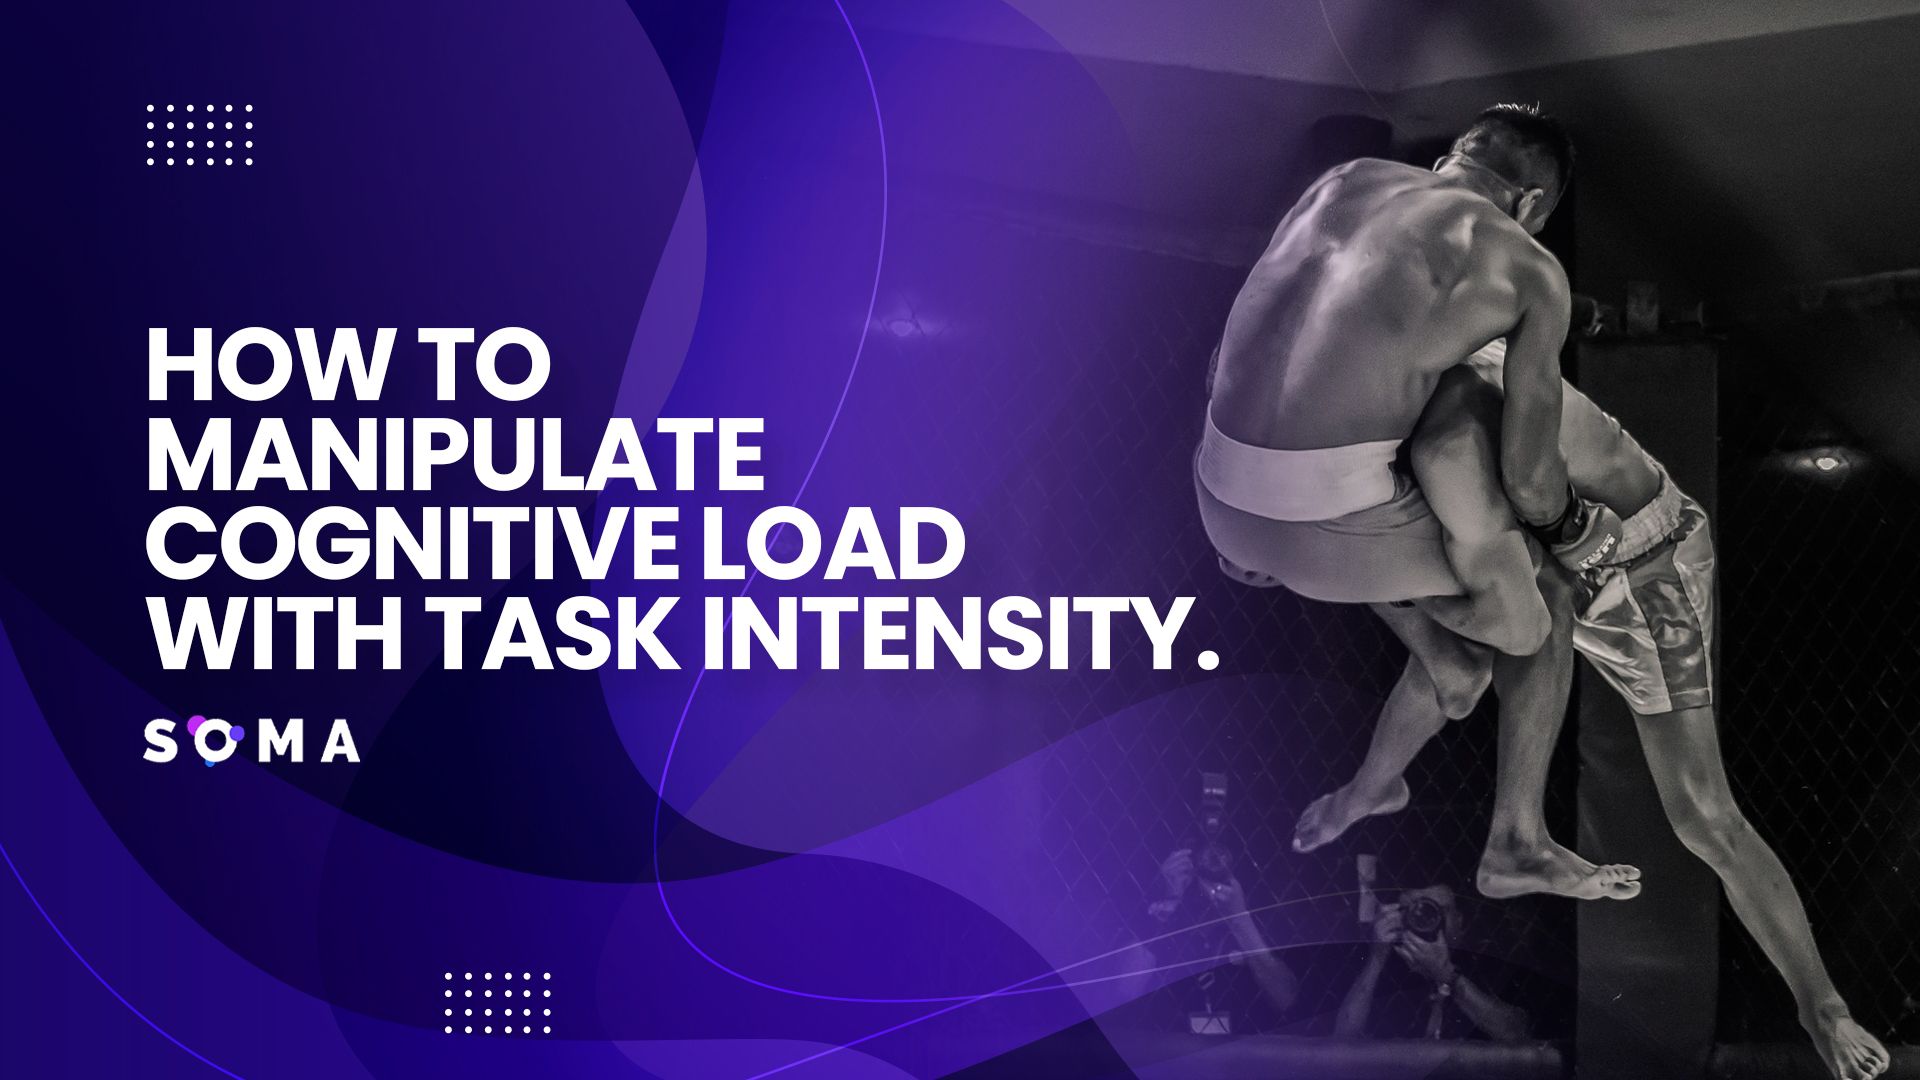 How To Manipulate Cognitive Load With Task Intensity.